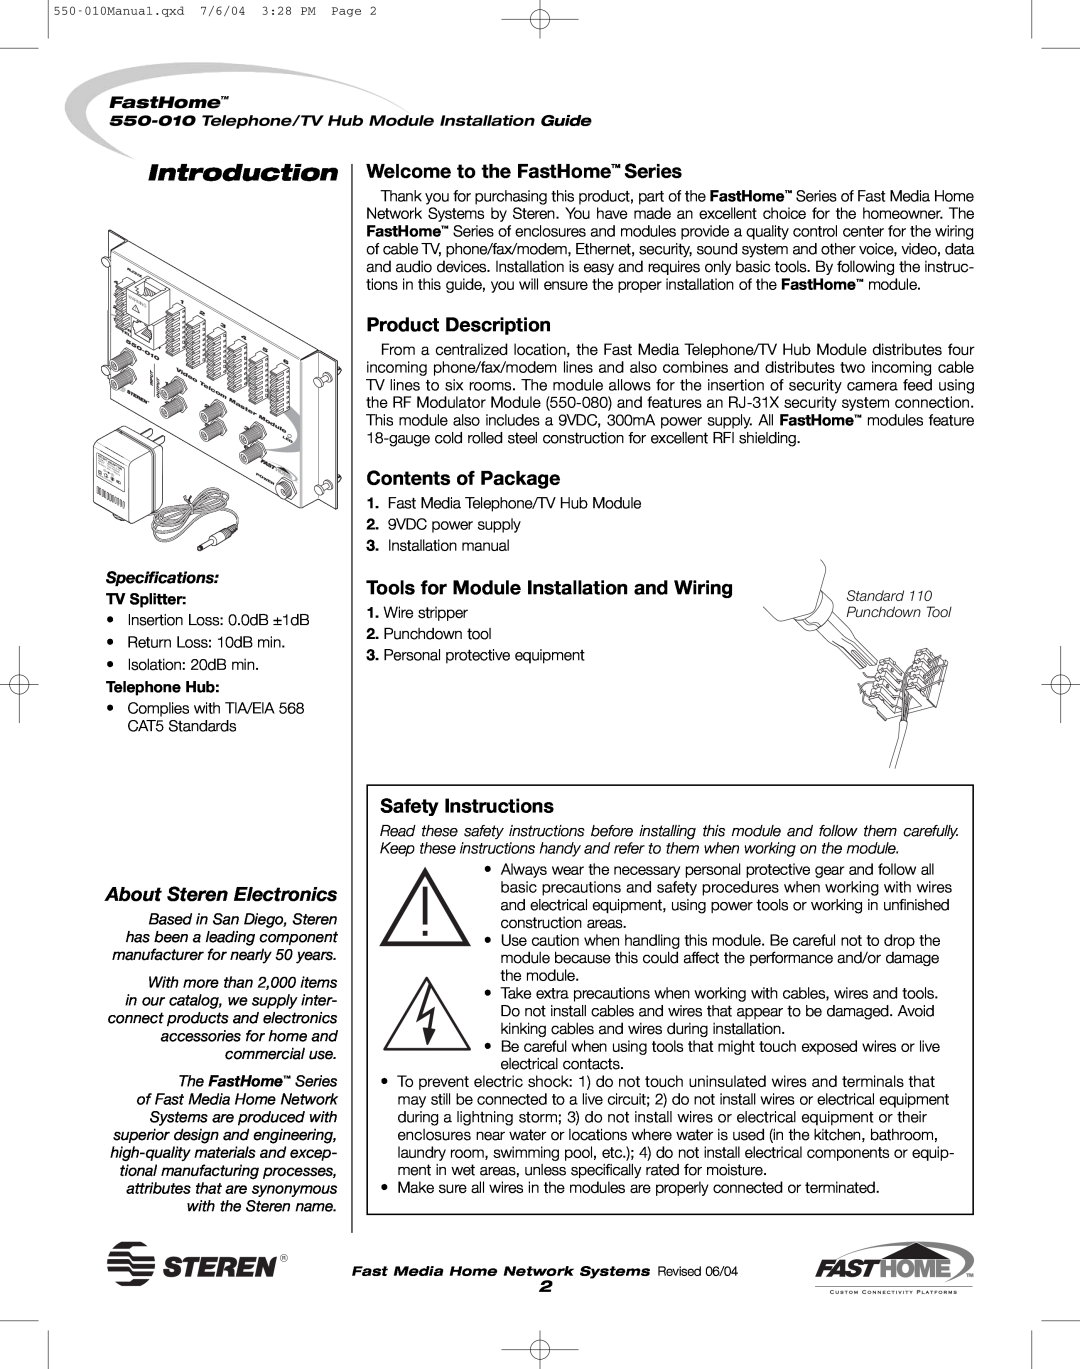 Steren 550-010 Introduction, Welcome to the FastHome Series, Product Description, Contents of Package, Safety Instructions 